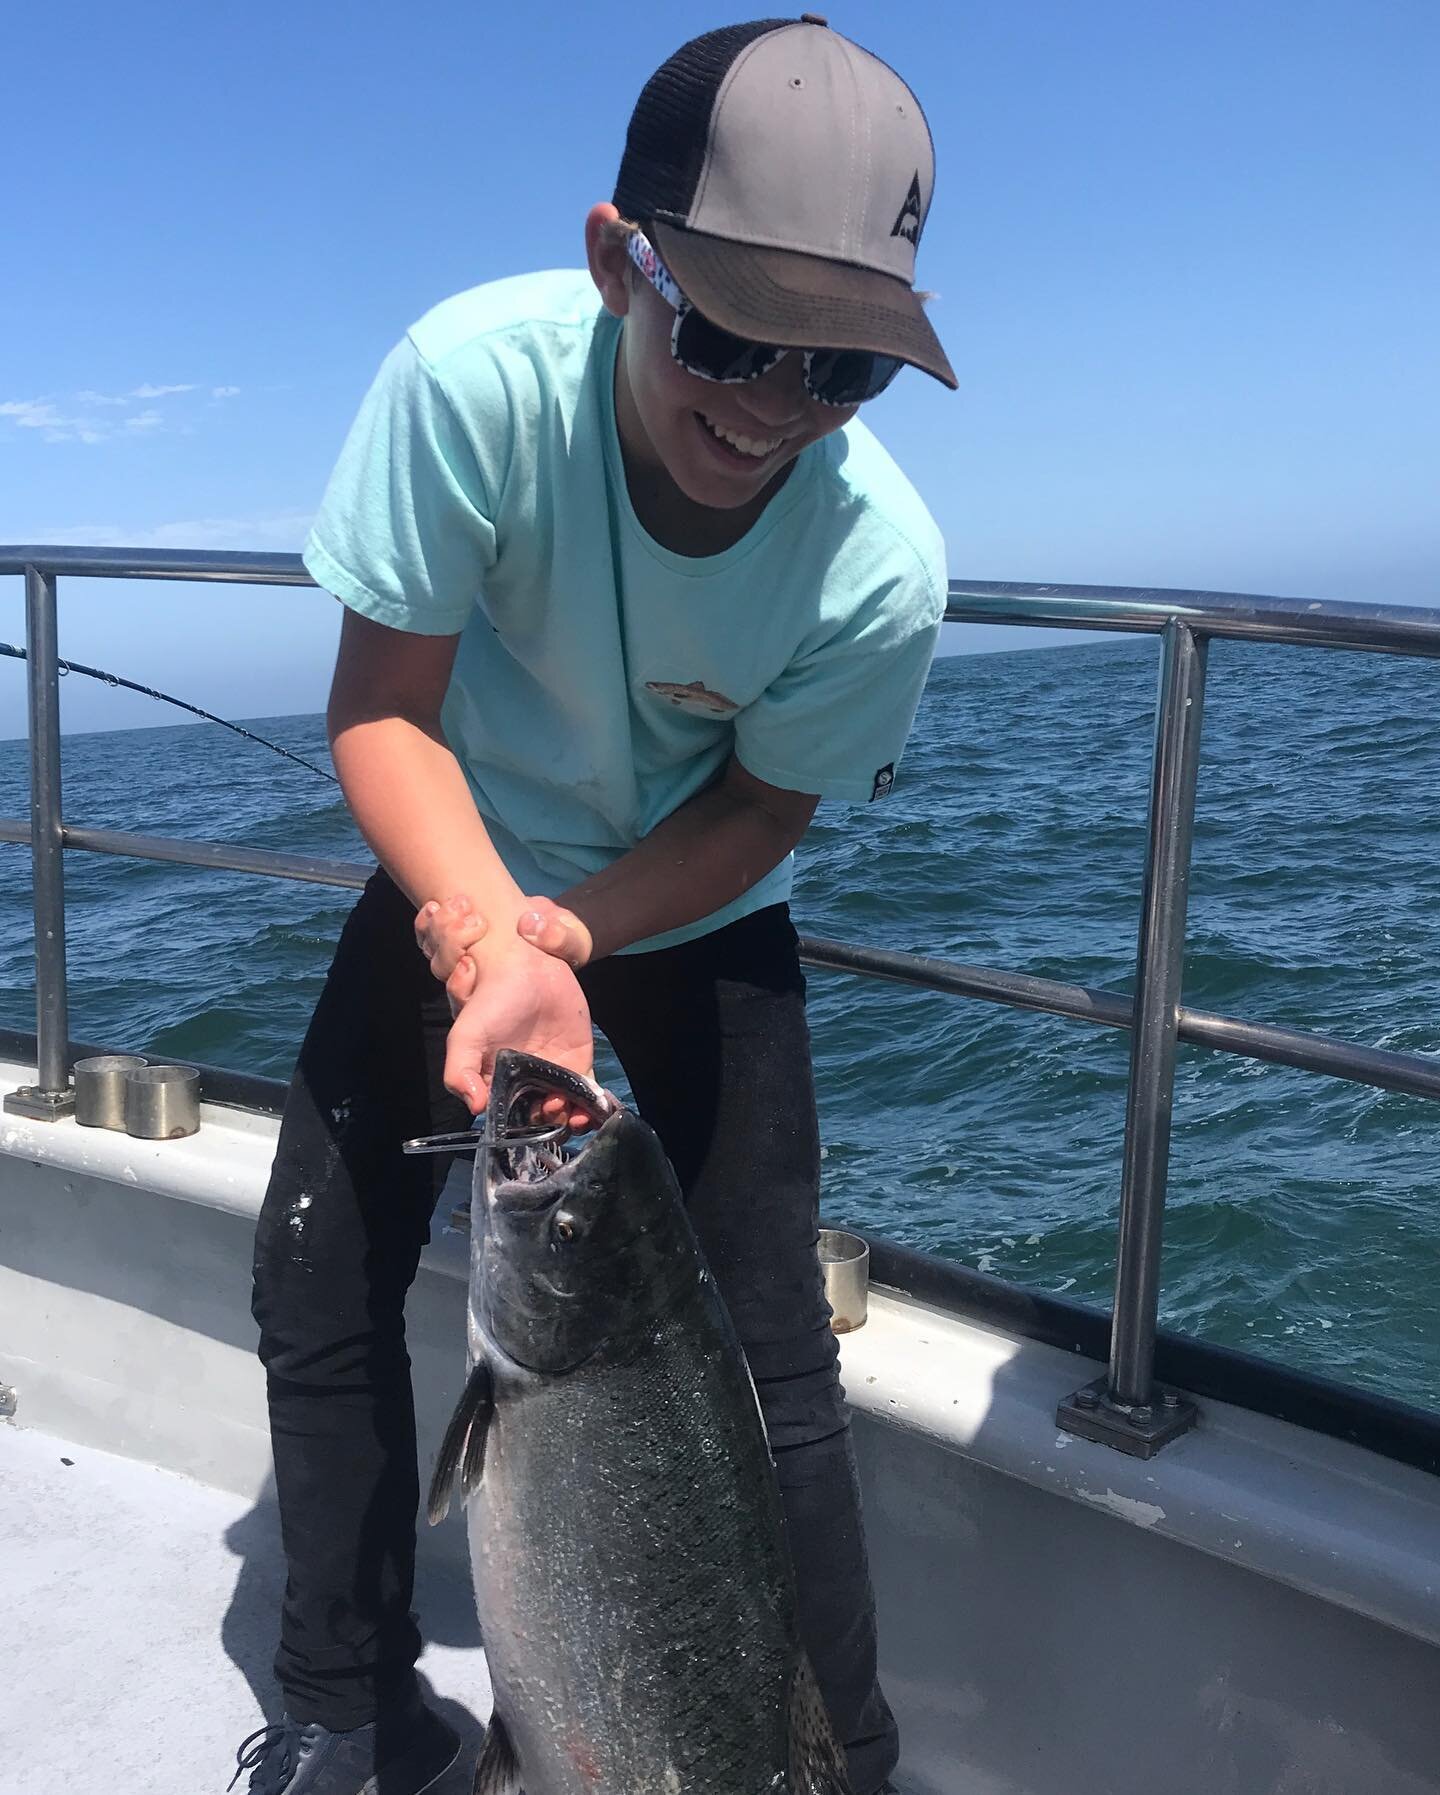 A few nice ones for the group today! We finished with 14 salmon to 25 lbs for 12 anglers! #fishemeryville #pacificpearlcharters.com #salmon #sfbayareafishing #fishing #thisiswhy